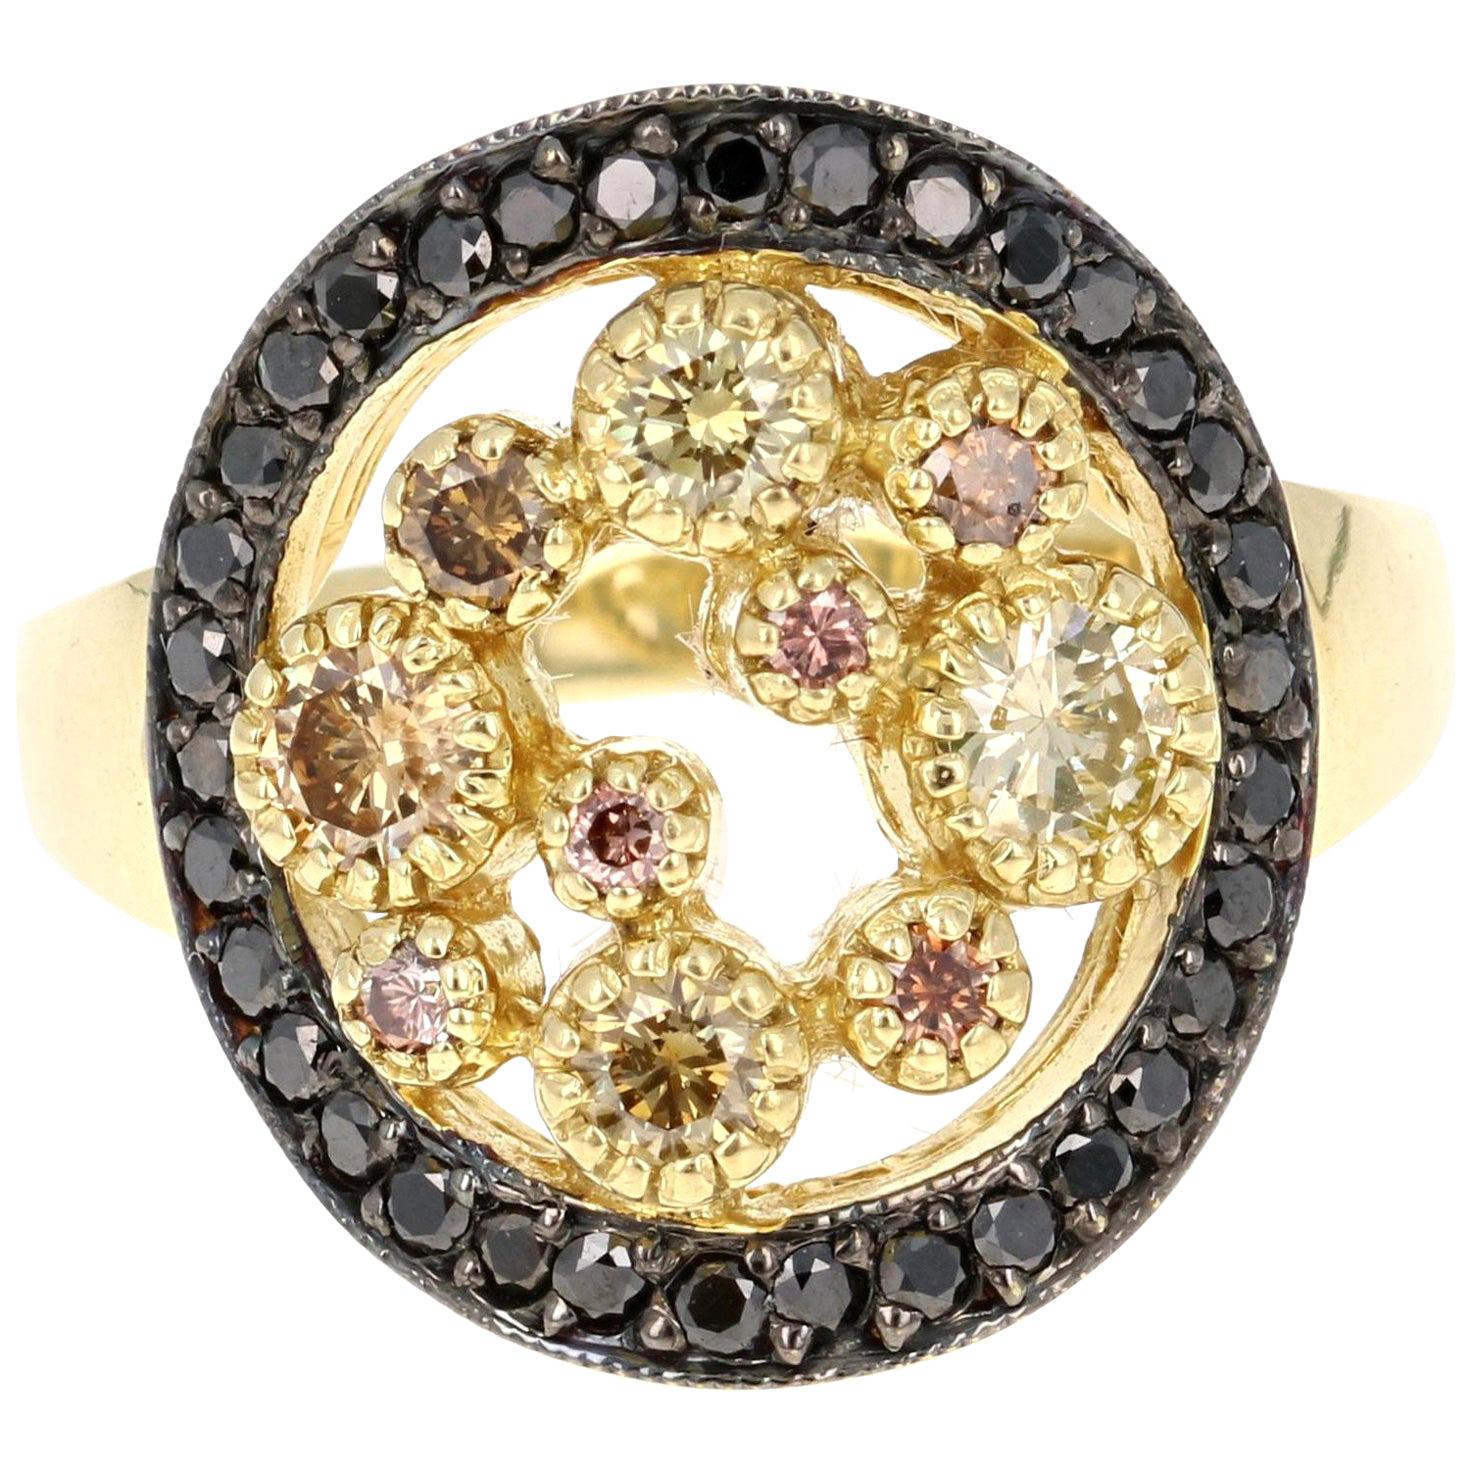 1.04 Carat Black and Fancy Colored Diamond Cocktail Ring 18 Karat Yellow Gold